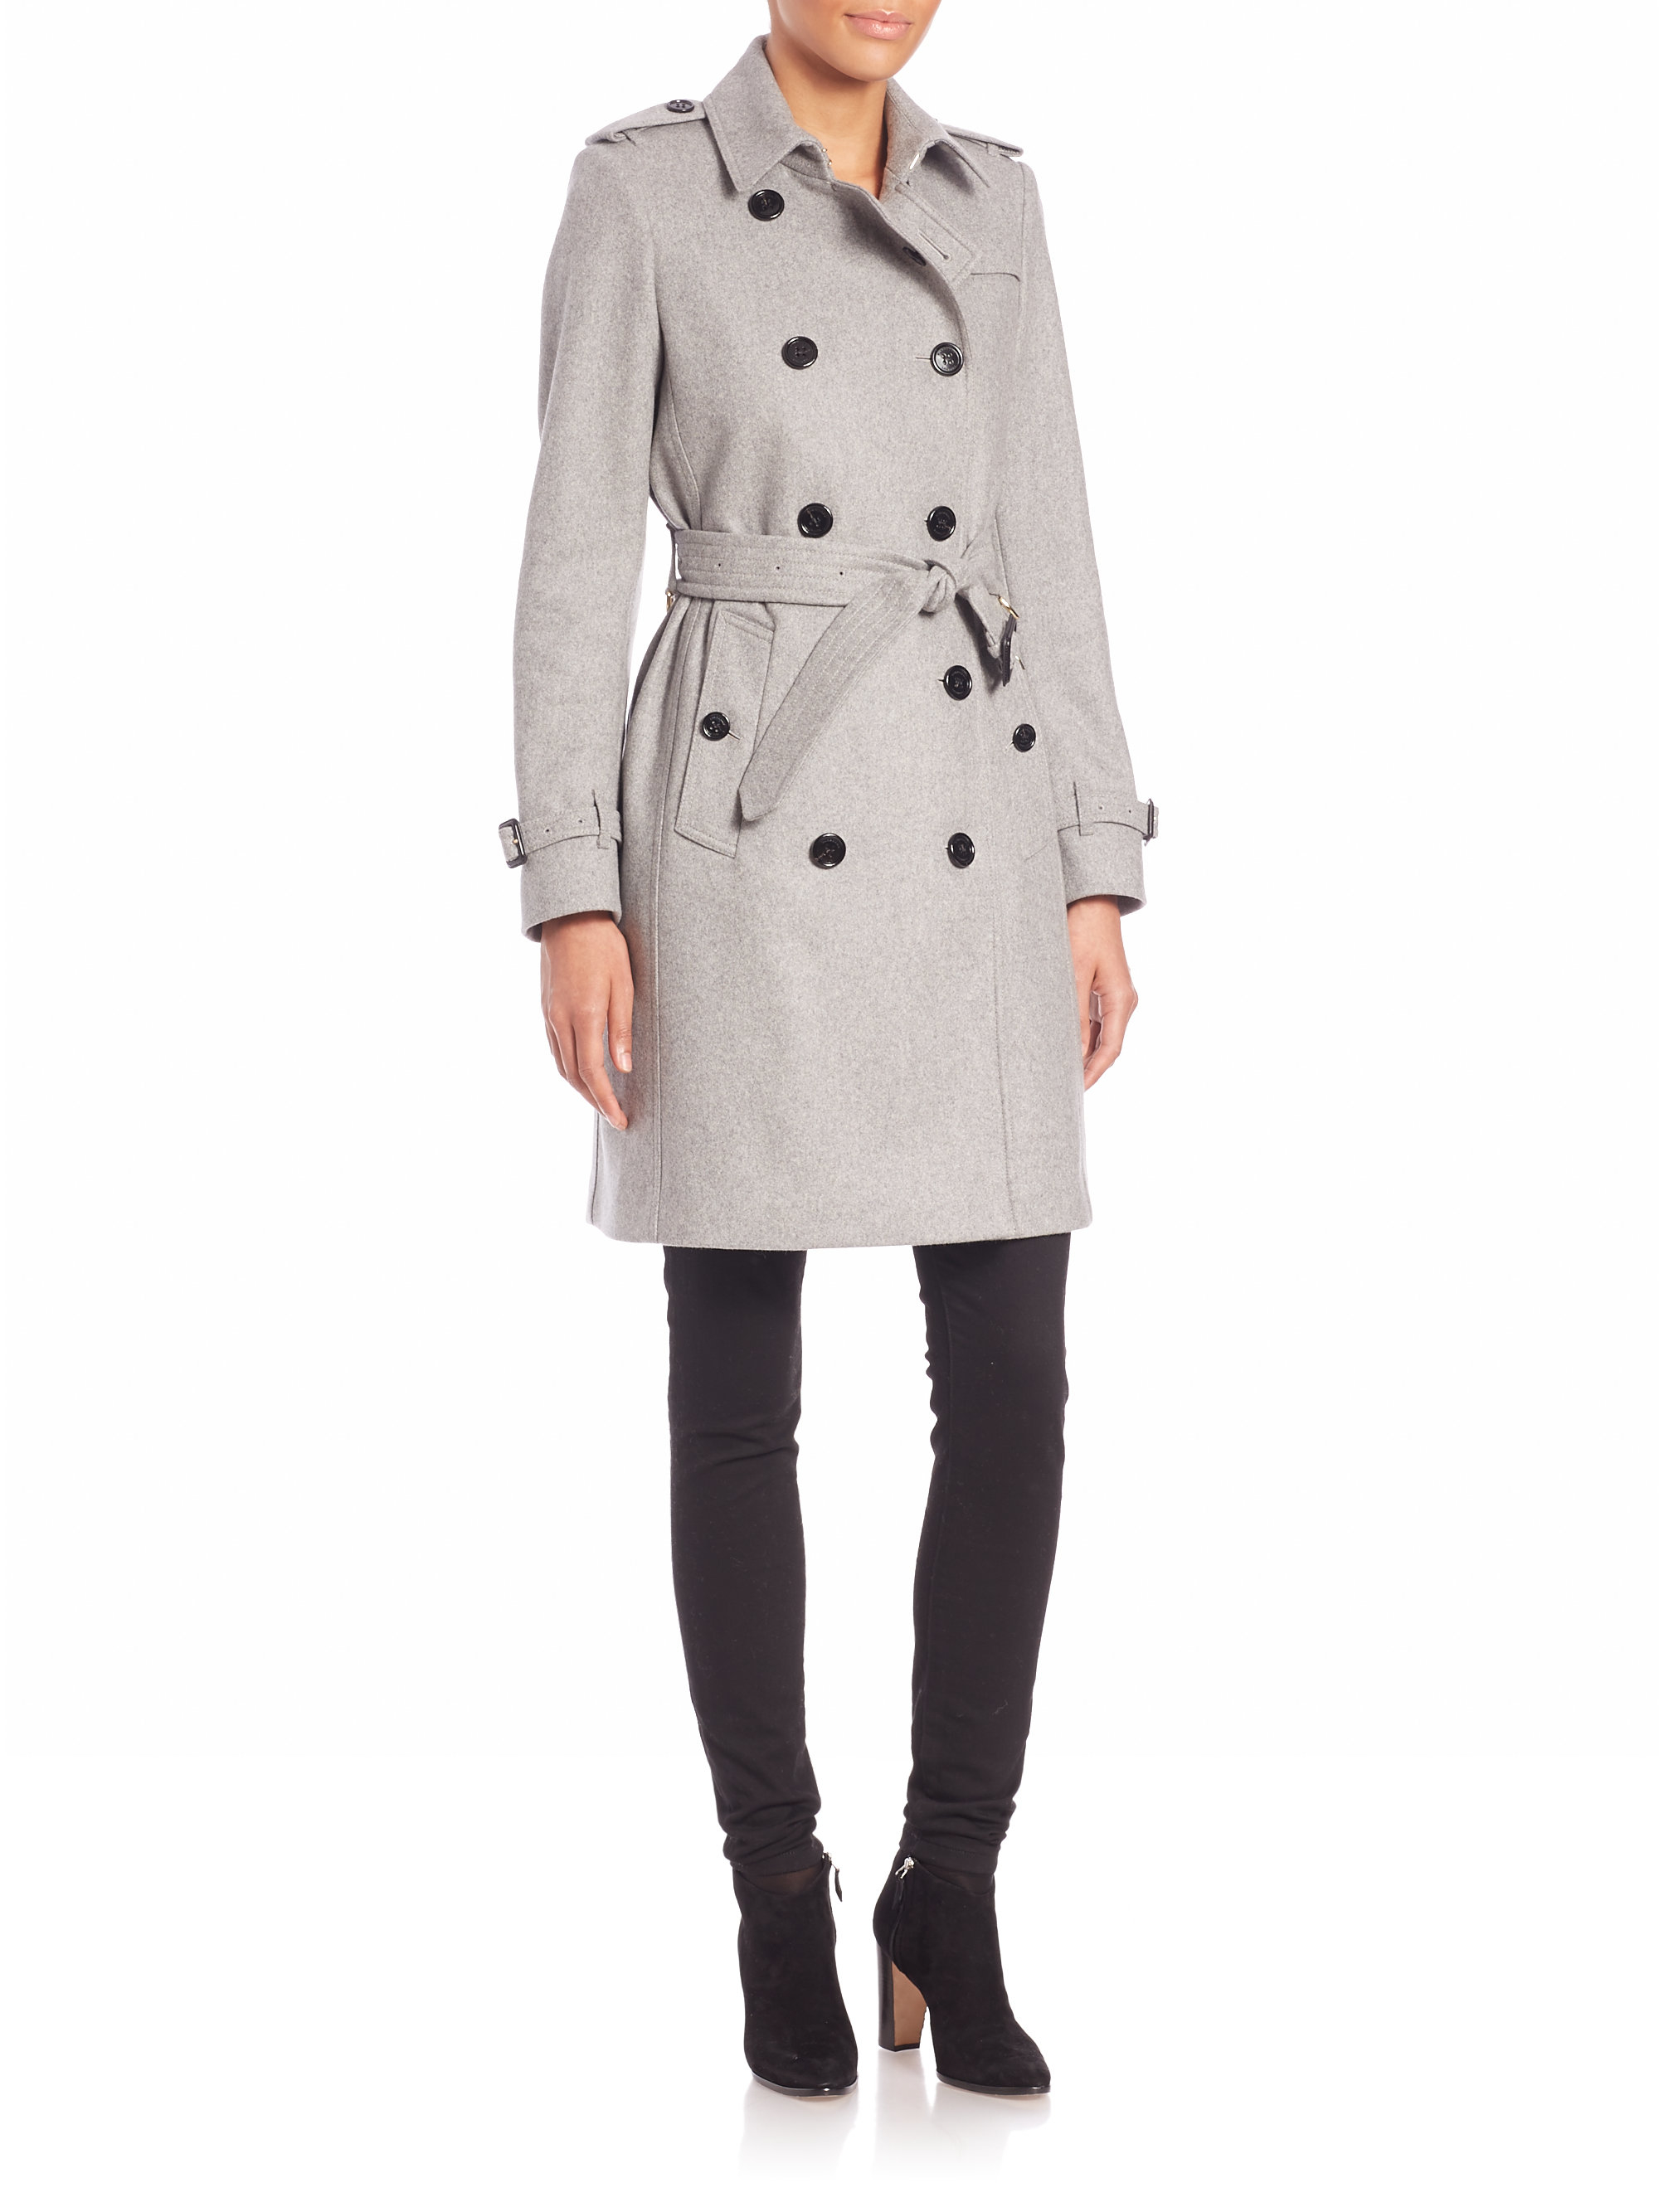 Lyst - Burberry Kensington Pale Grey Cashmere Trench Coat in Gray